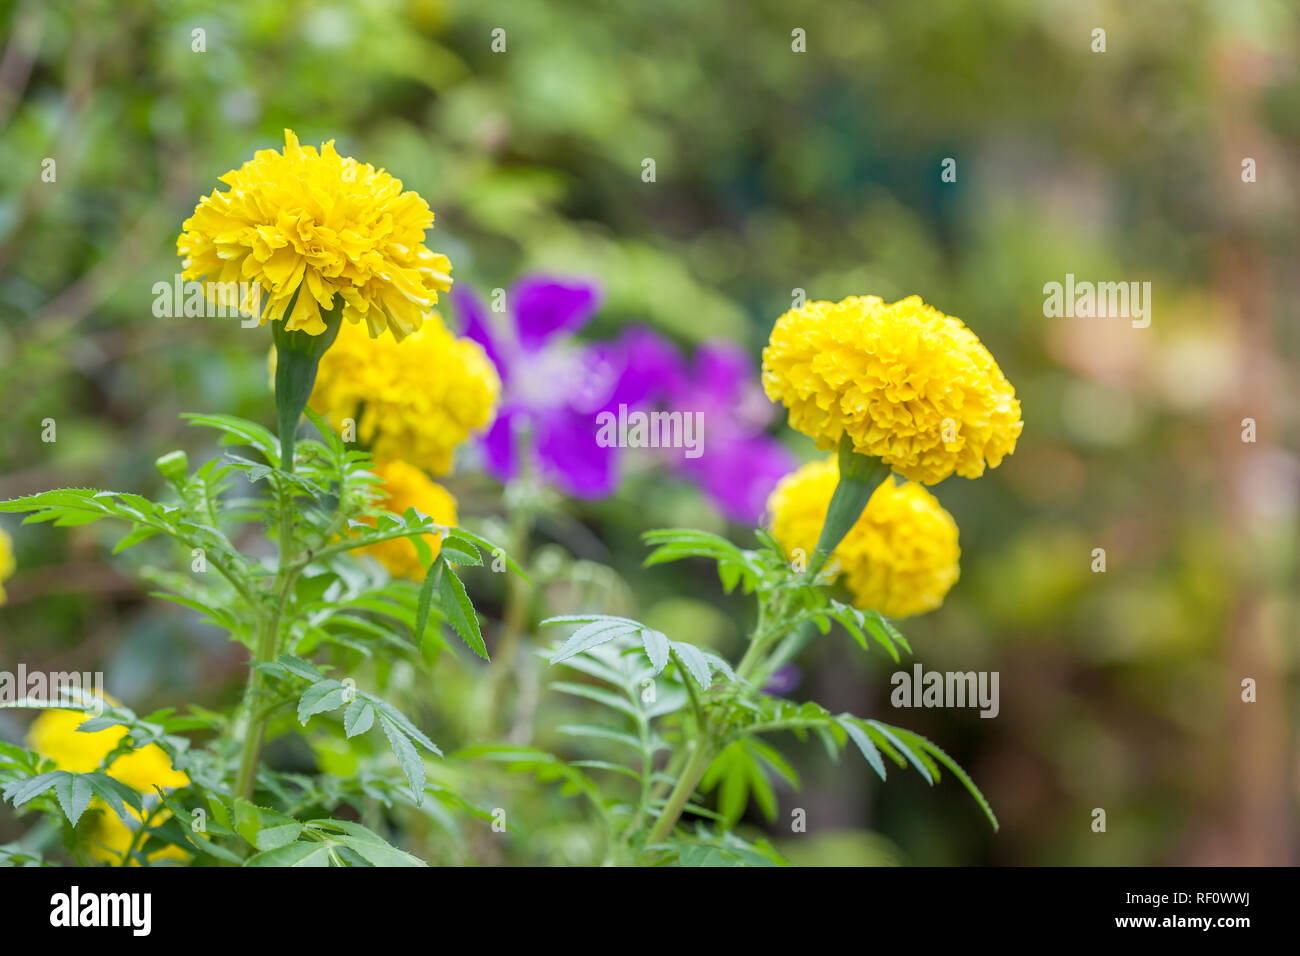 Yellow marigolds are large, beautiful in the garden as a product of agriculture. Stock Photo